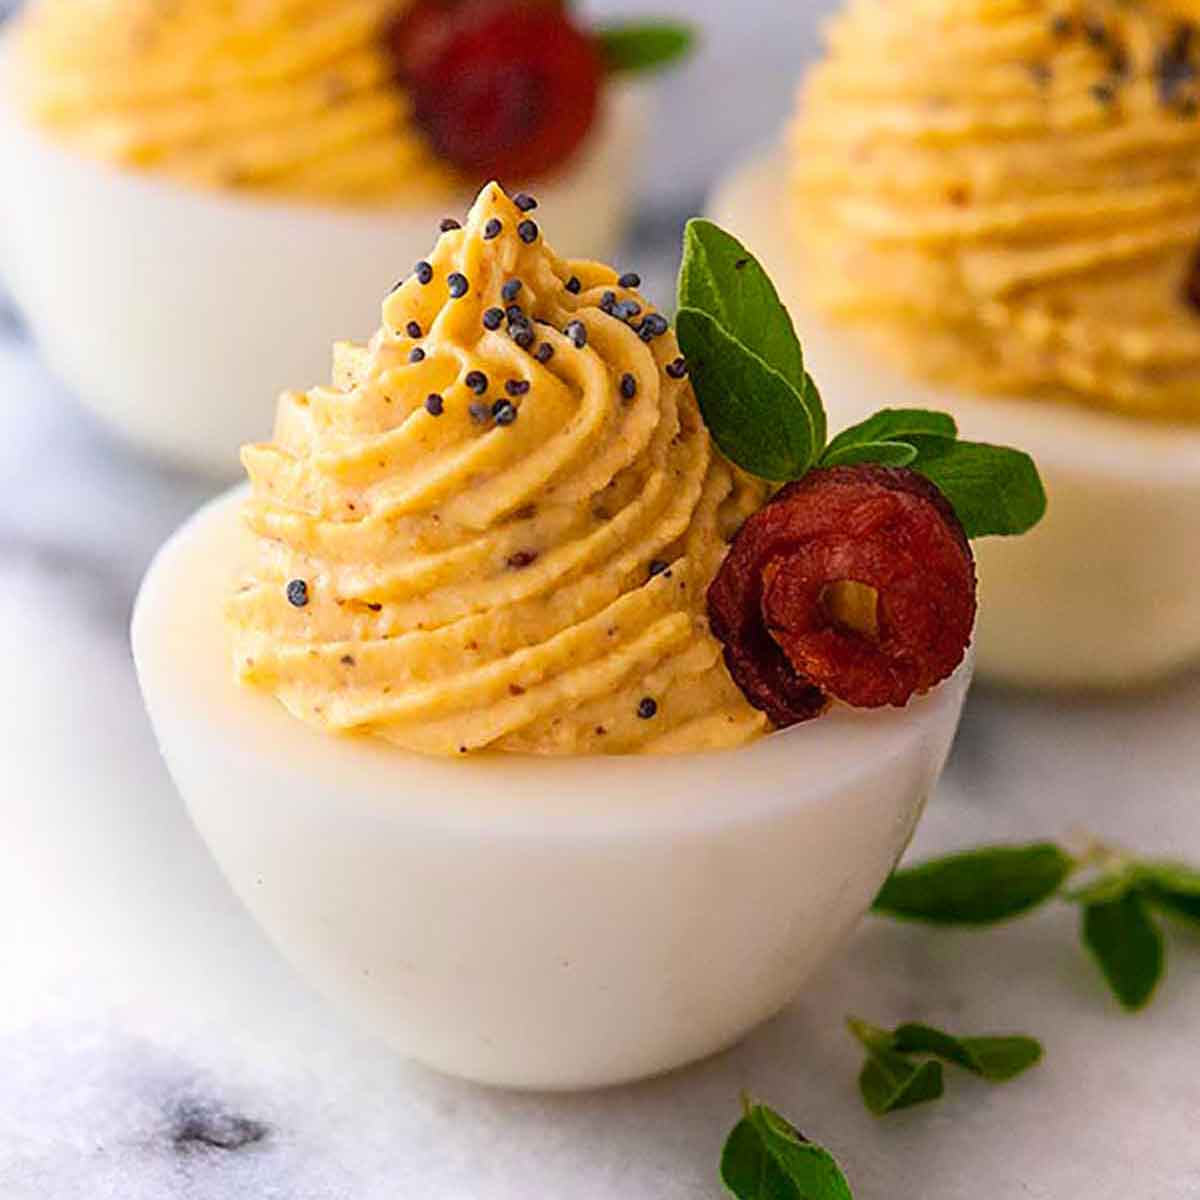 3 deviled eggs garnished with tiny bacon roses, oregano leaves and a sprinkle of poppy seeds.